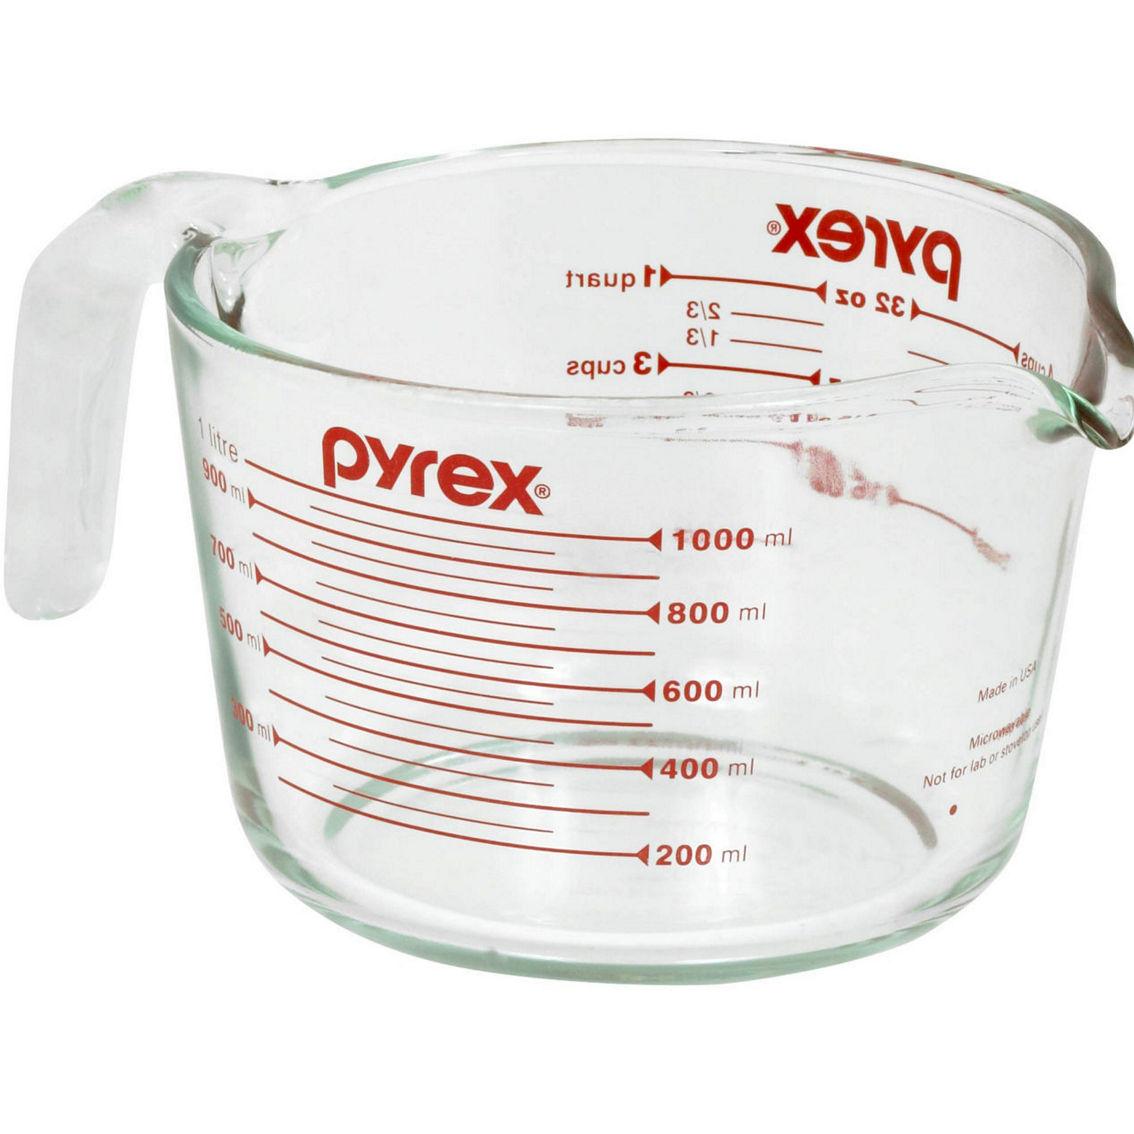 Pyrex 4 Cup Measuring Cup - Image 2 of 2